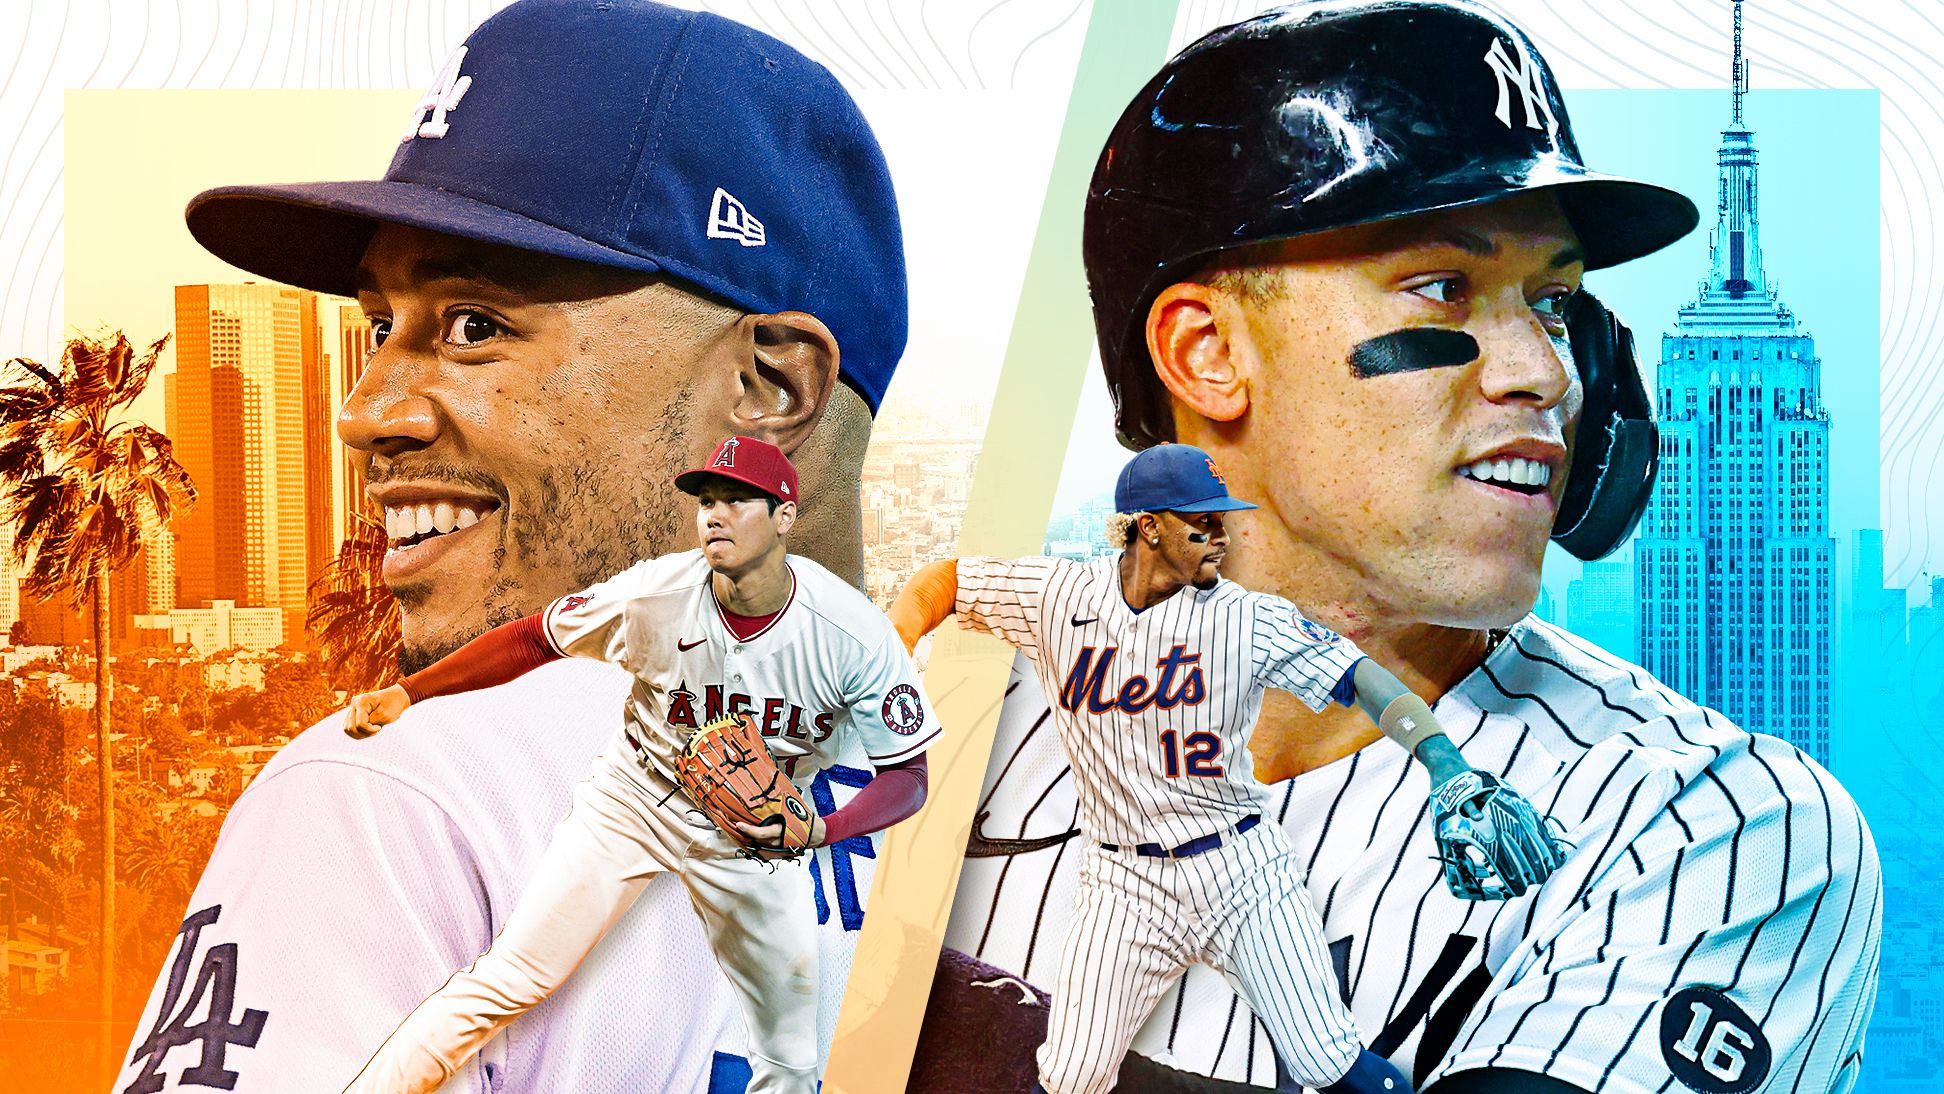 Angels and Dodgers vs. Mets and Yankees - Which MLB town would you take right now - L.A. or NYC?